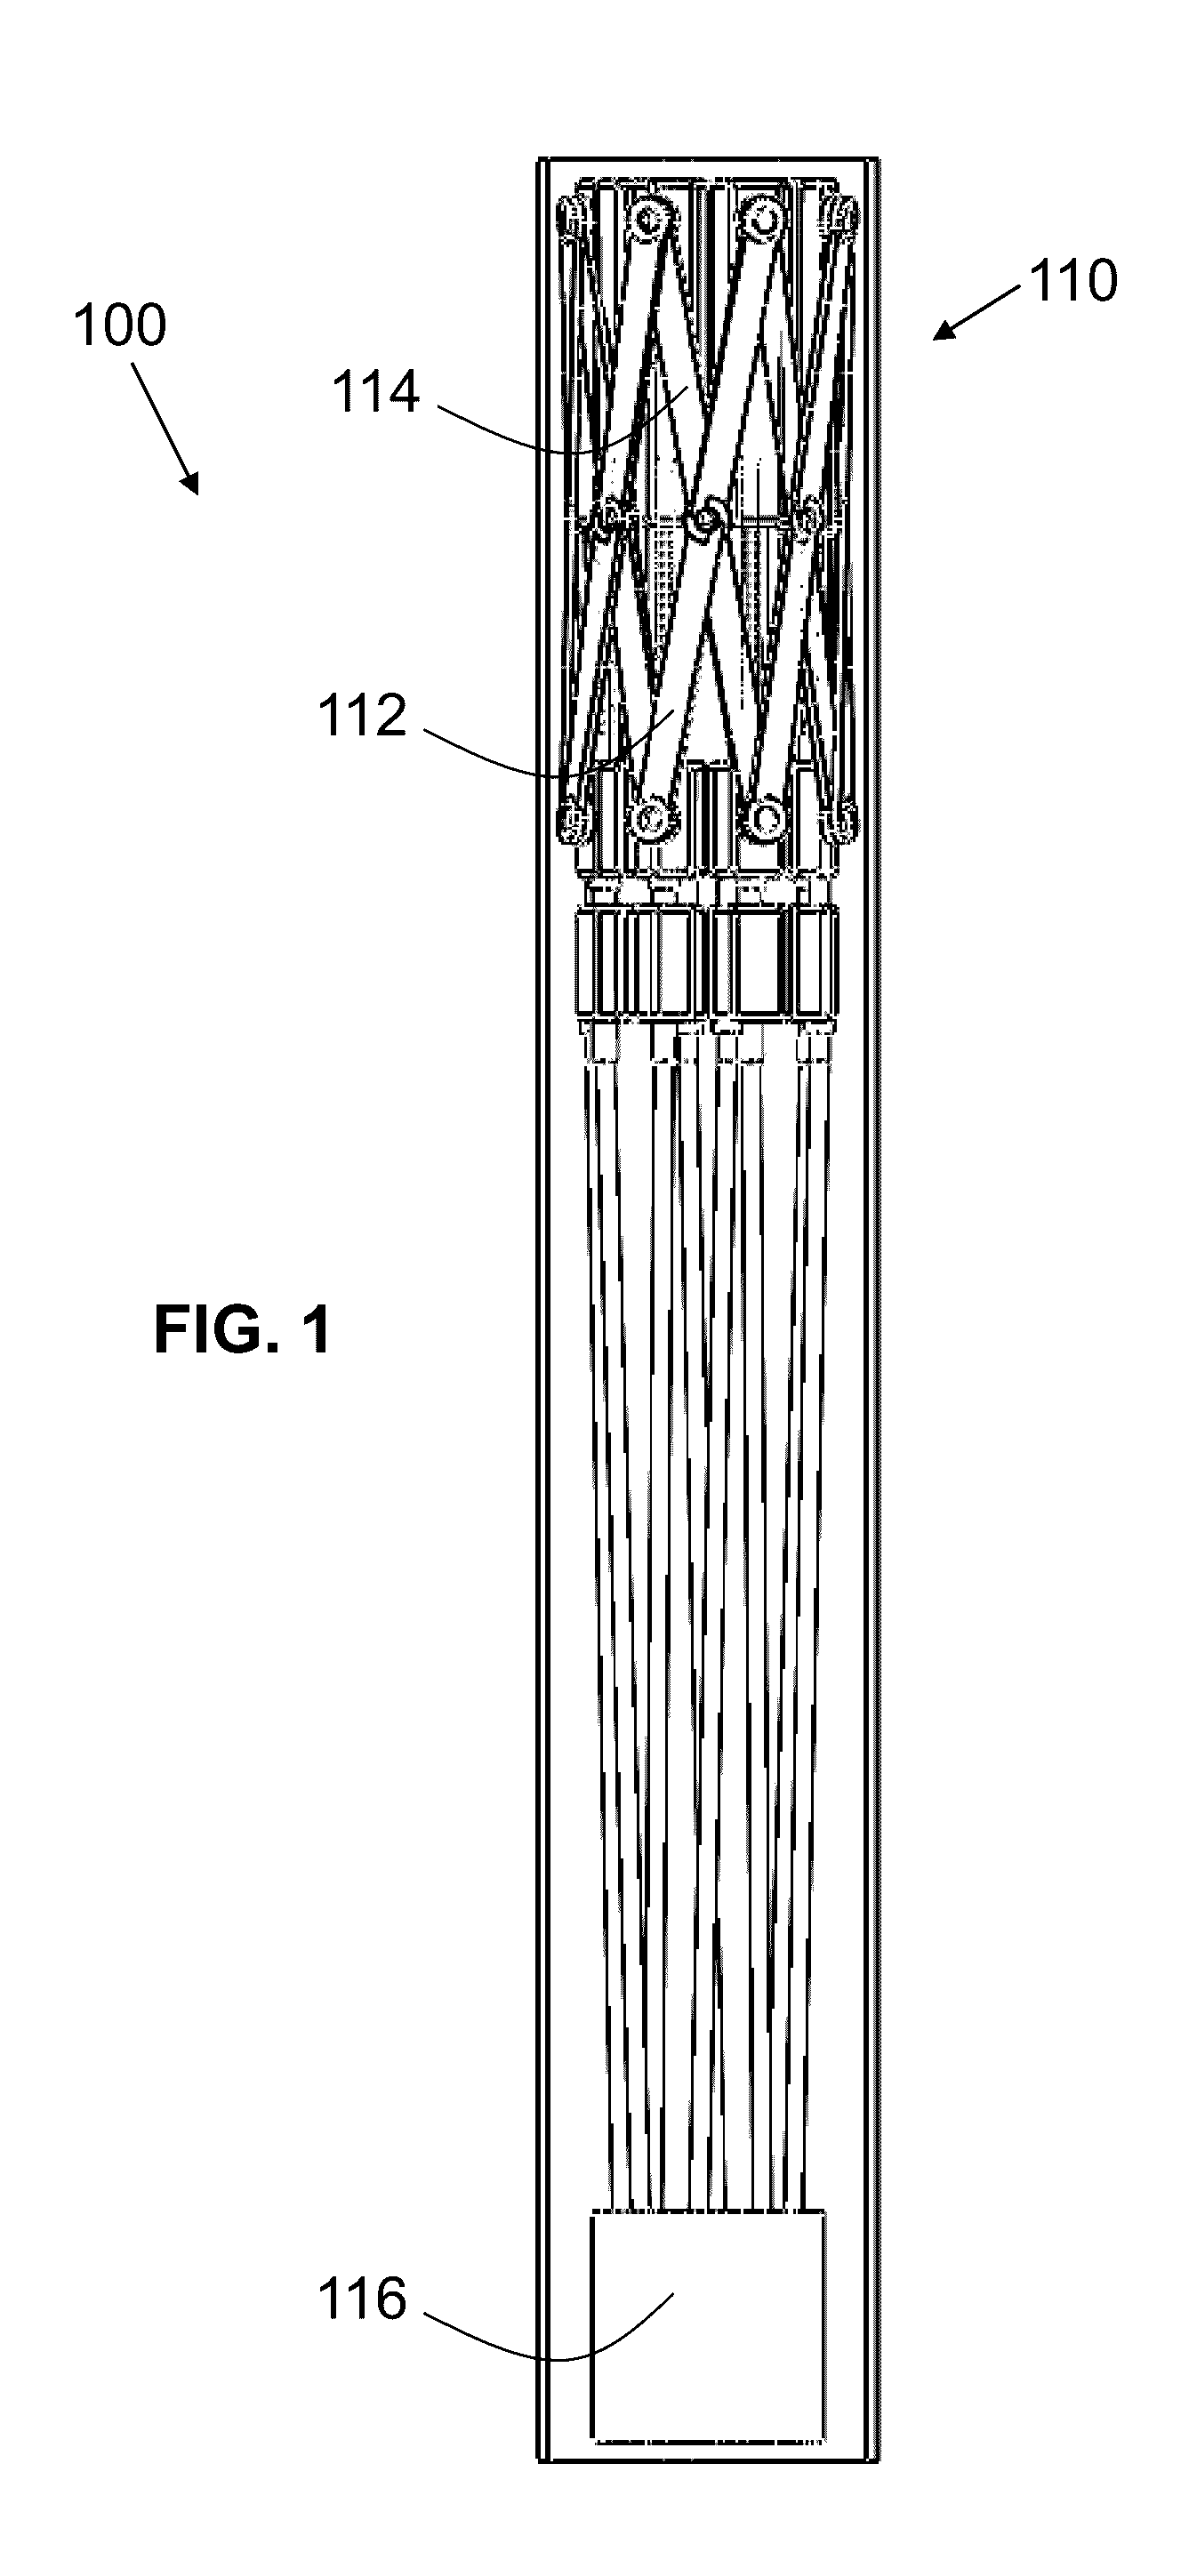 Actively controllable stent, stent graft, heart valve and method of controlling same